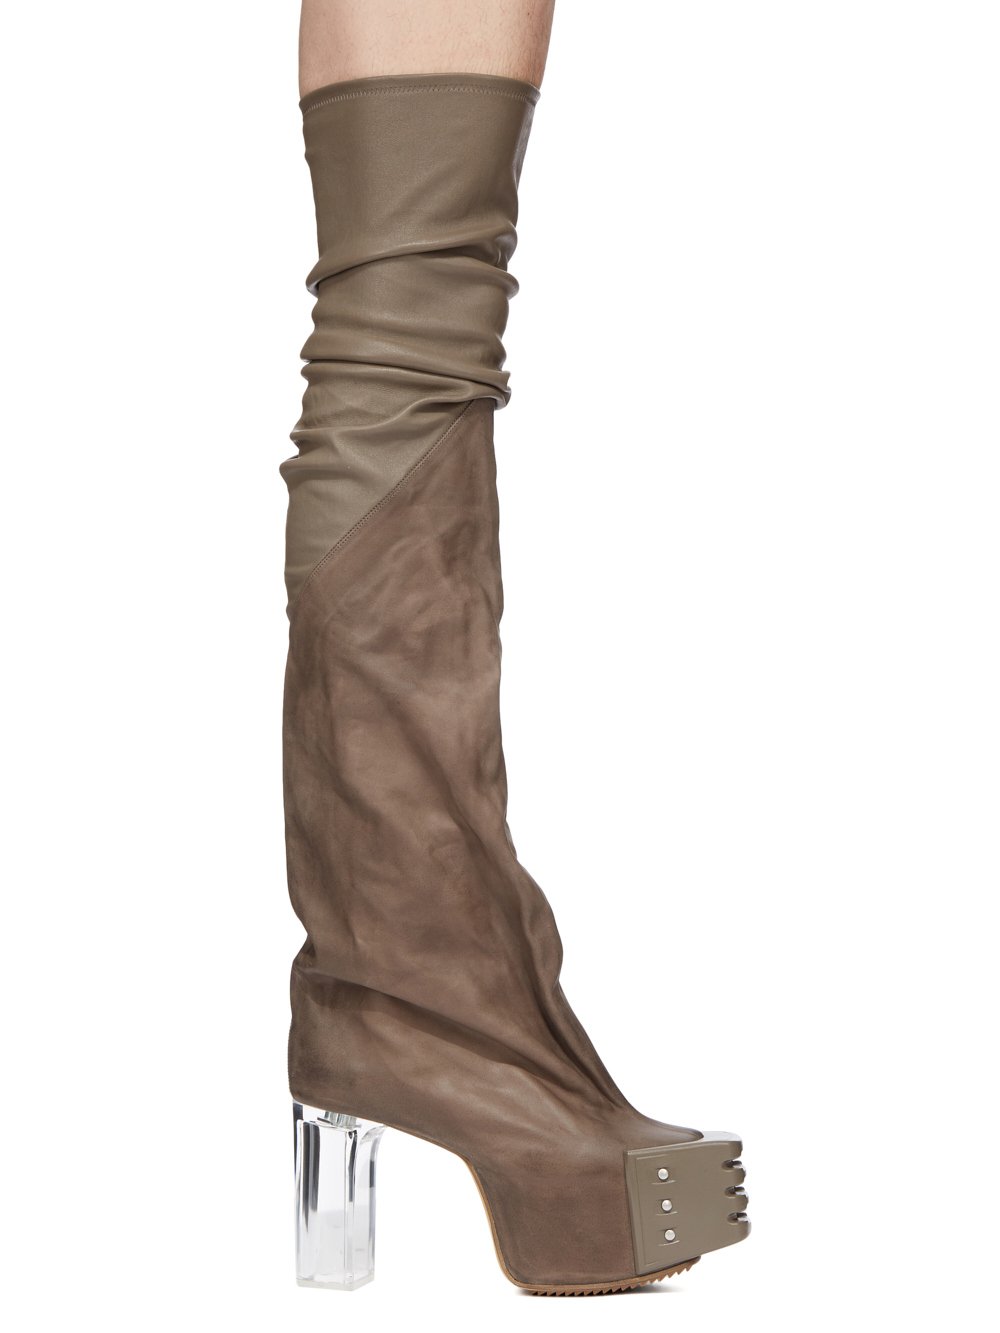 RICK OWENS FW23 LUXOR RUNWAY FLARED PLATFORMS 45 IN DUST STRETCH LAMB LEATHER AND GREYWOLF NUBUCK 